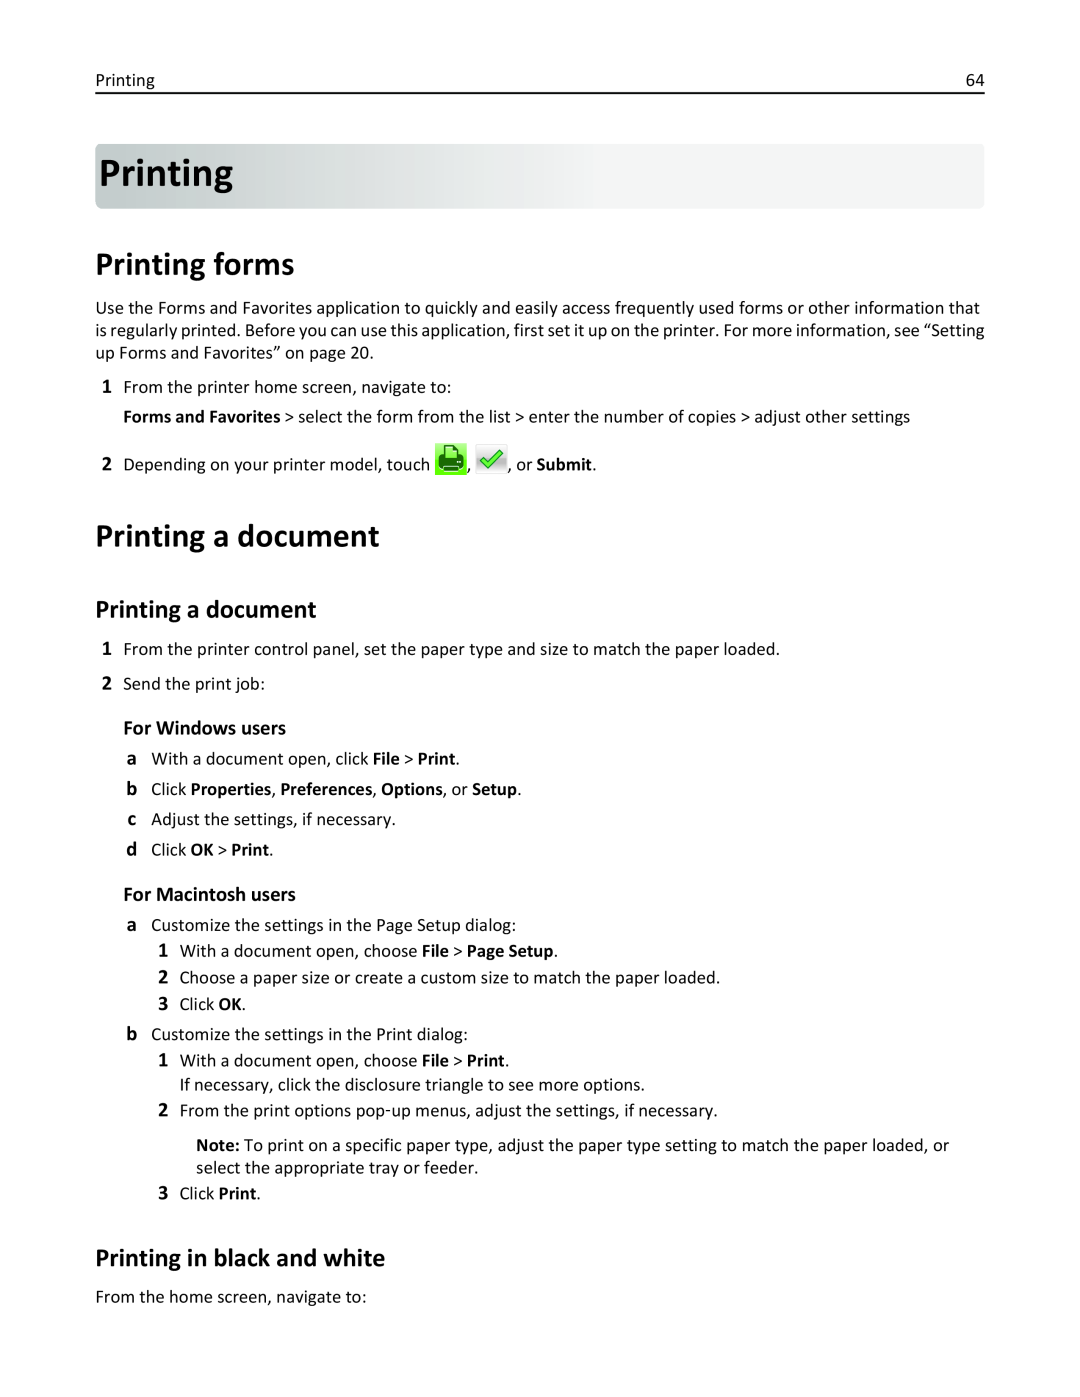 Lexmark 436 Printing forms, Printing a document, Printing in black and white, For Windows users, For Macintosh users 